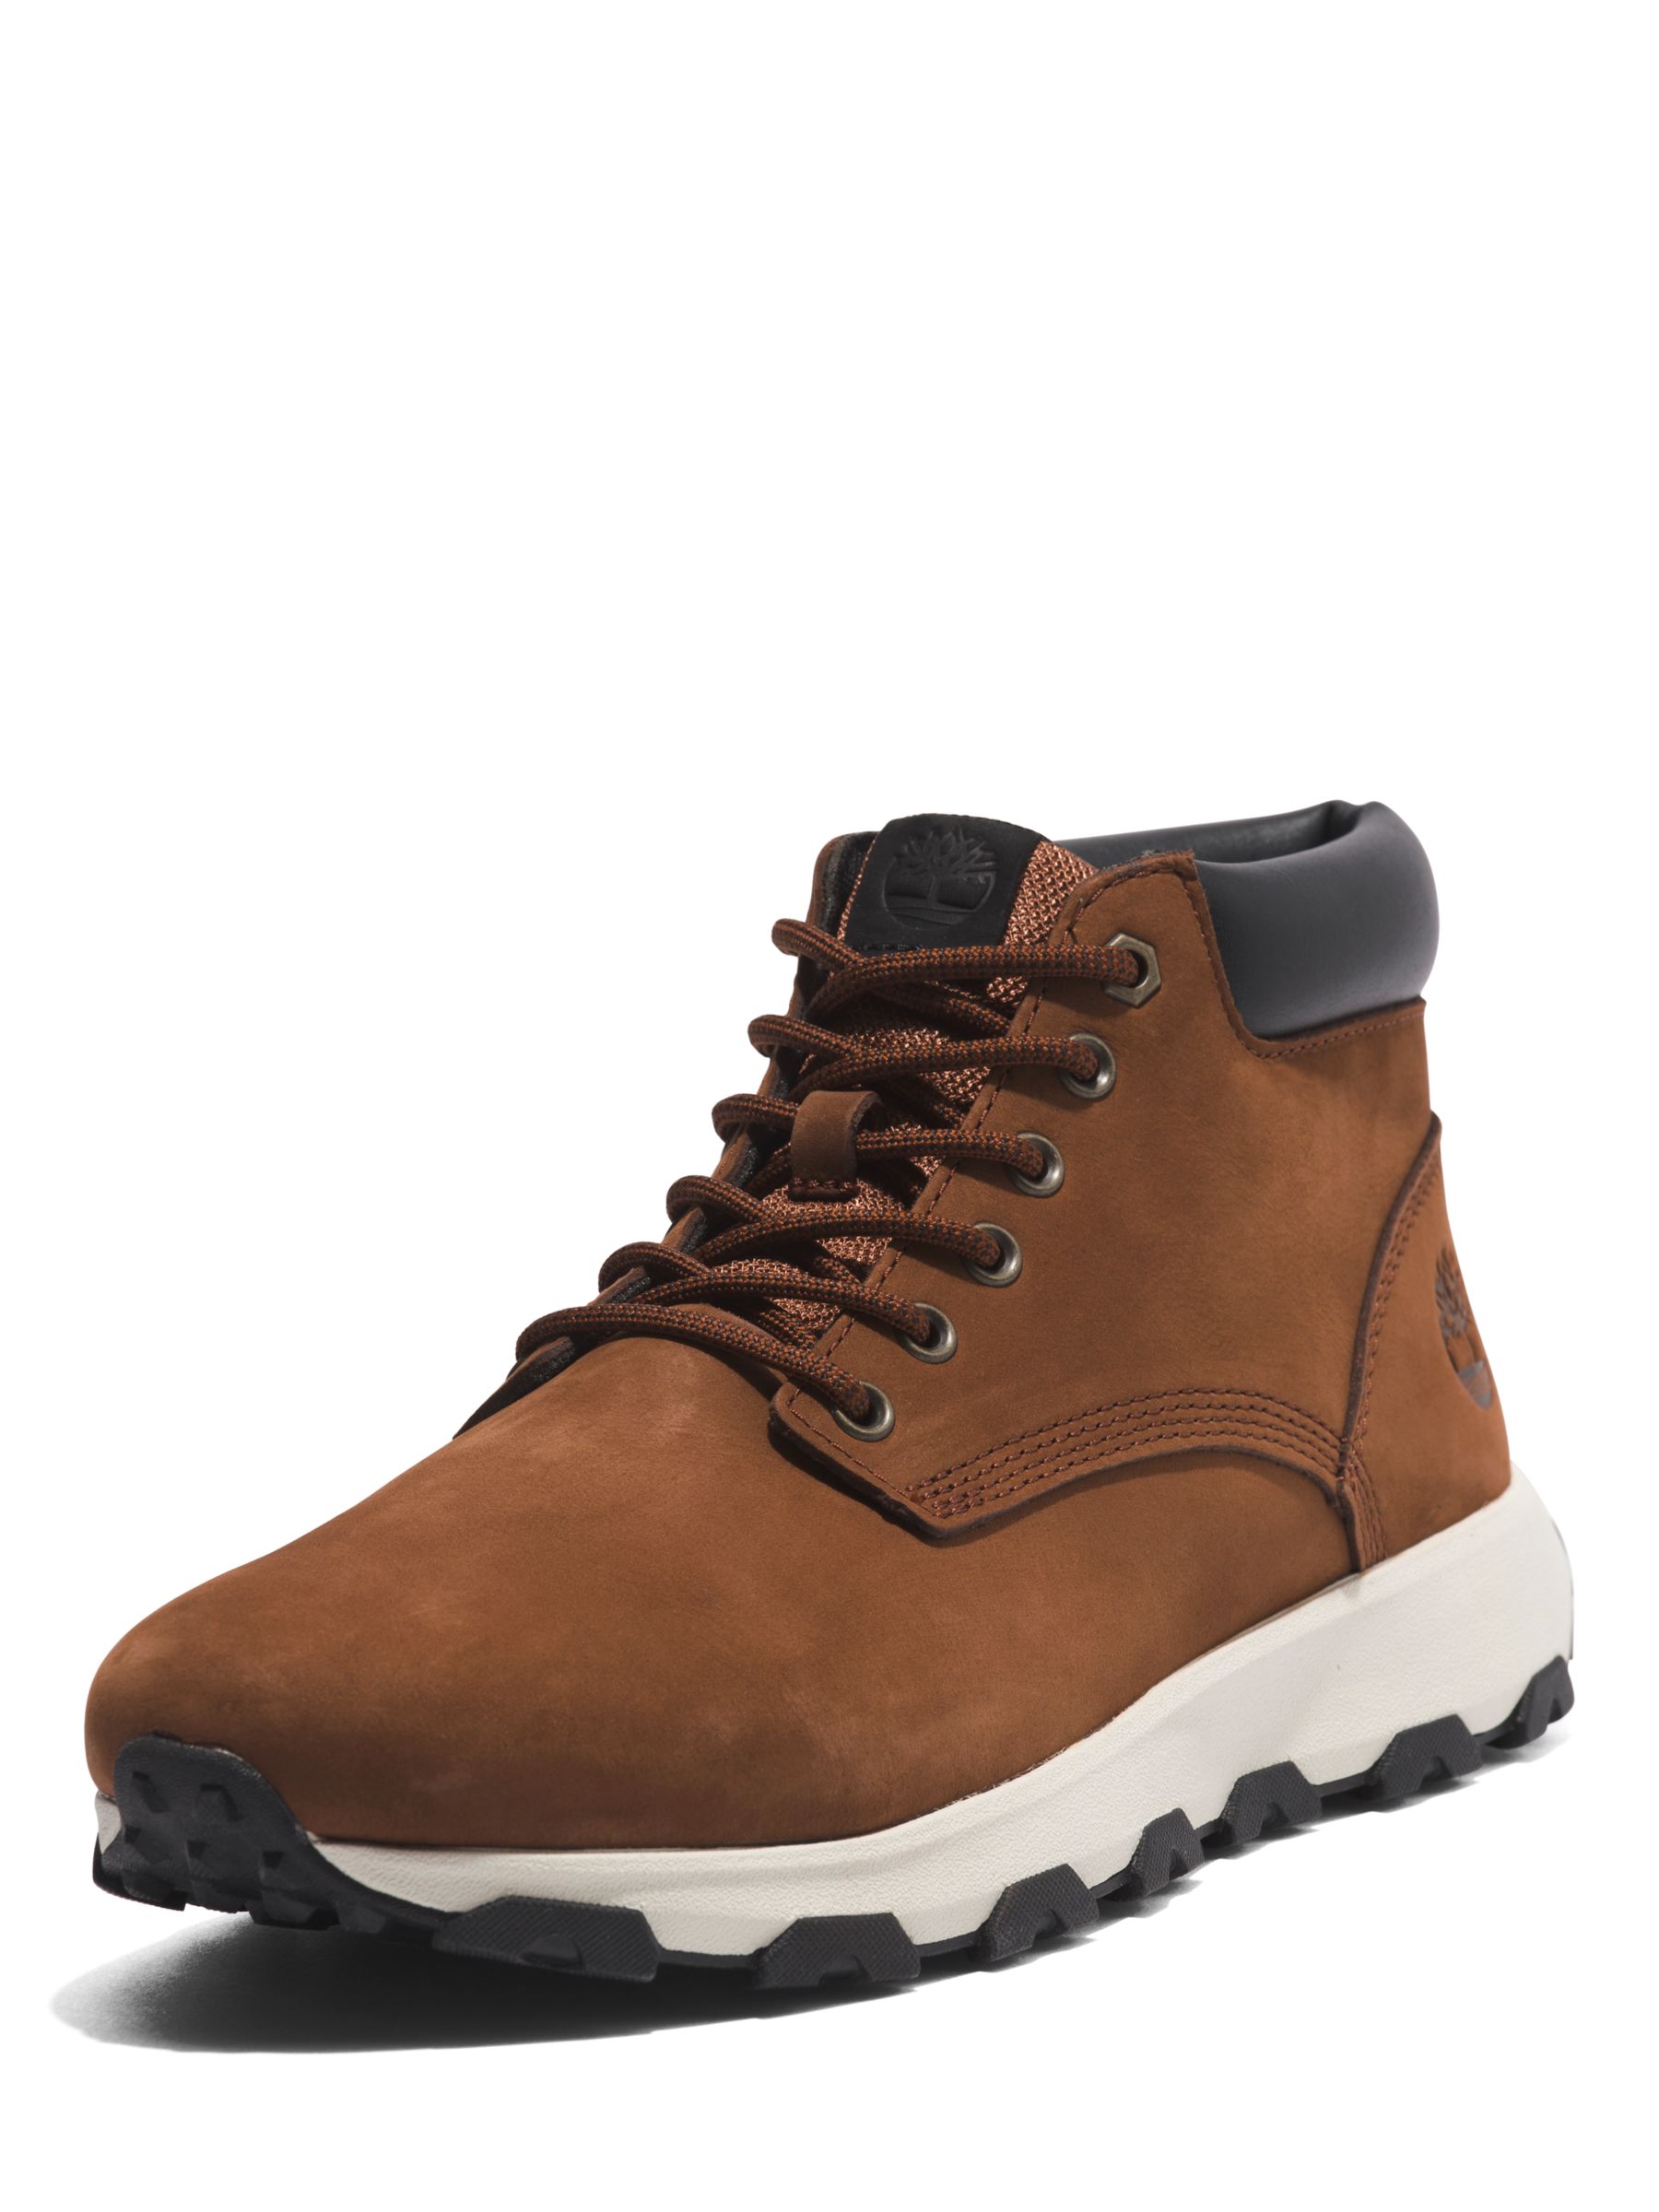 Timberland Winsor Park Lace Up Boots, Mid Brown at John Lewis & Partners